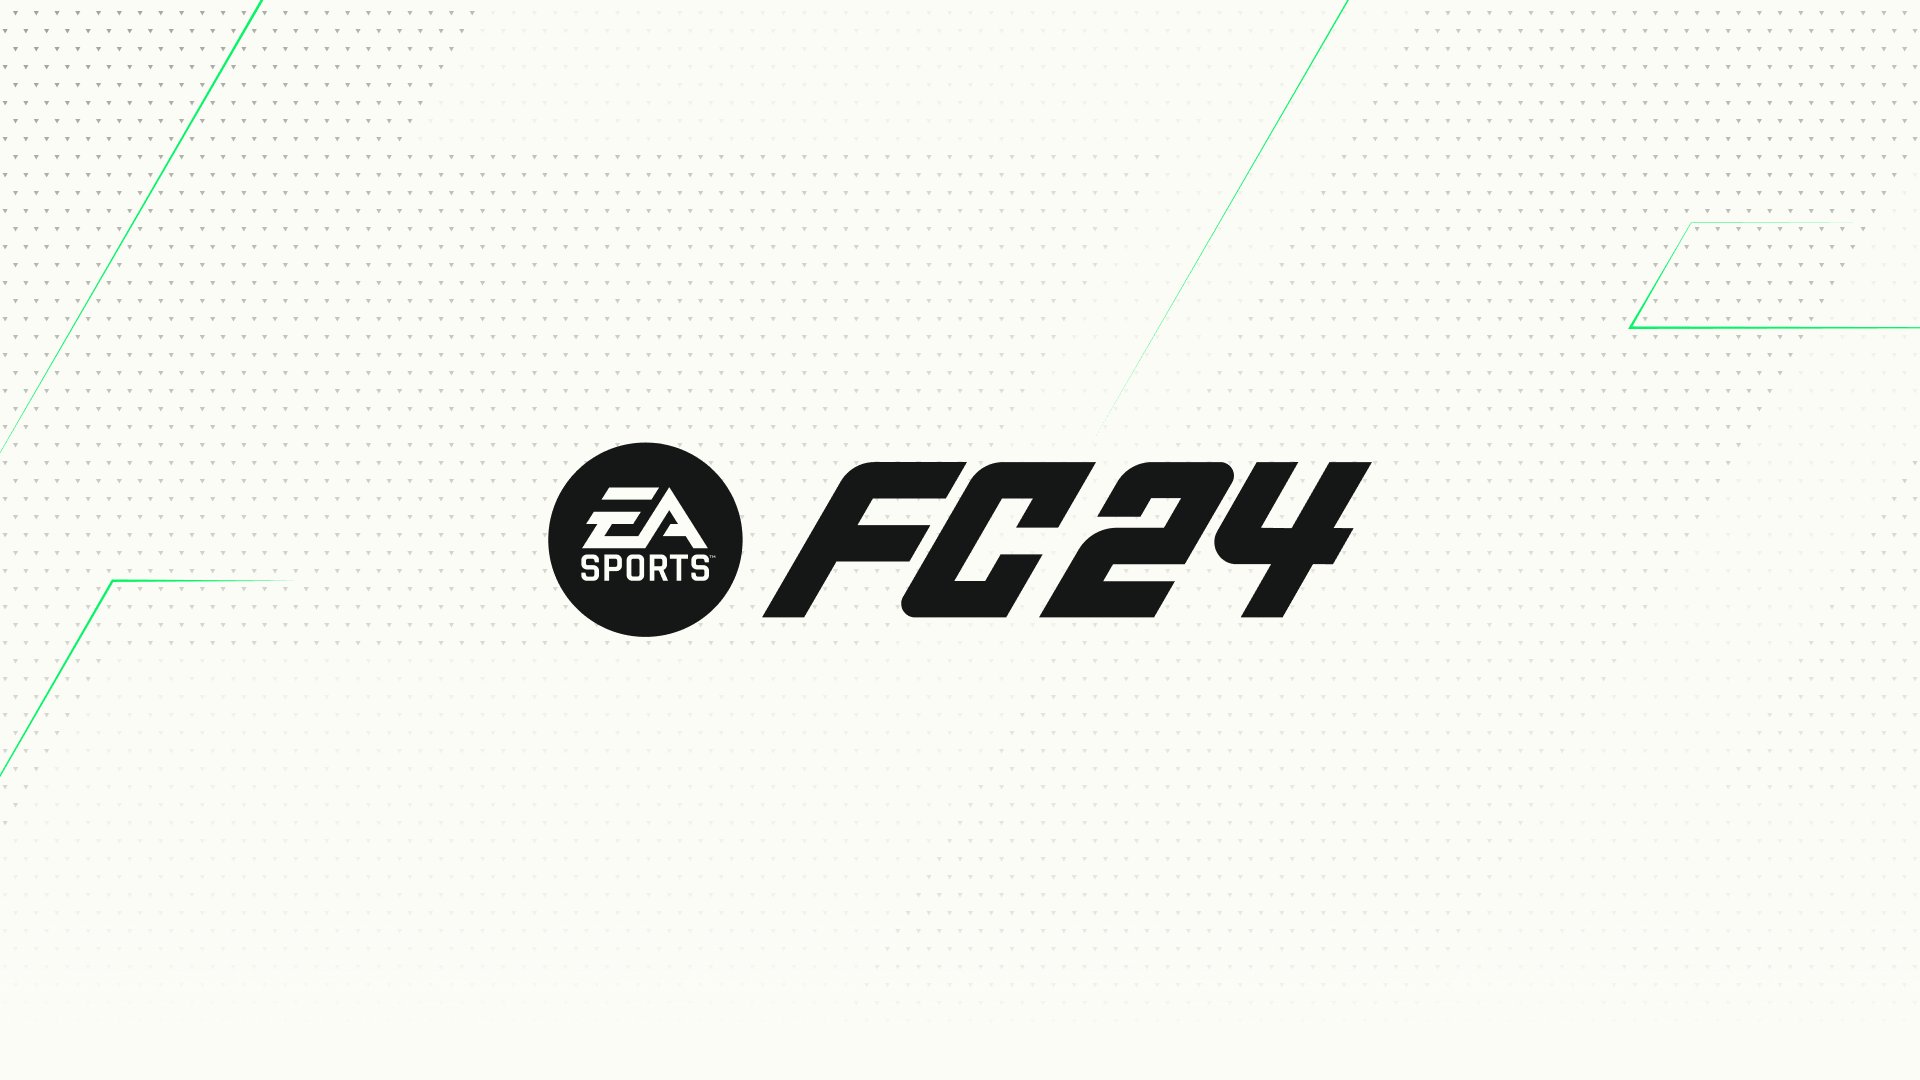 PlayStation Game Size on X: 🚨 EA SPORTS FC 24 BETA 🟦 #EAFC24